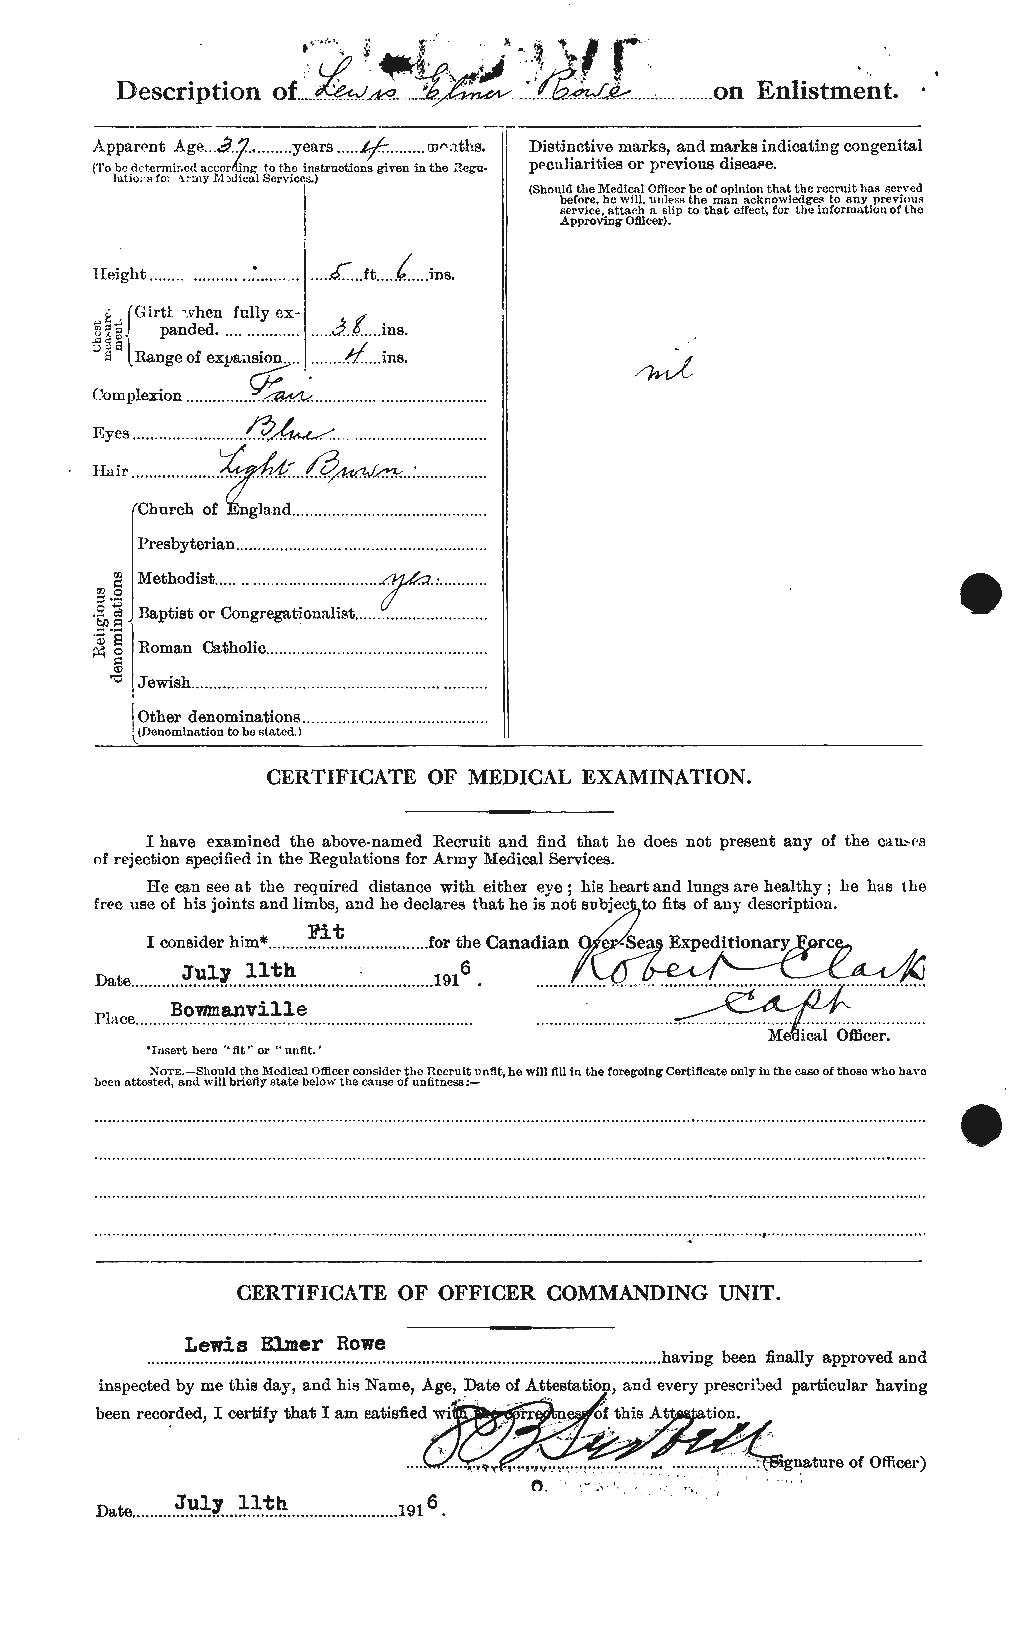 Personnel Records of the First World War - CEF 615948b